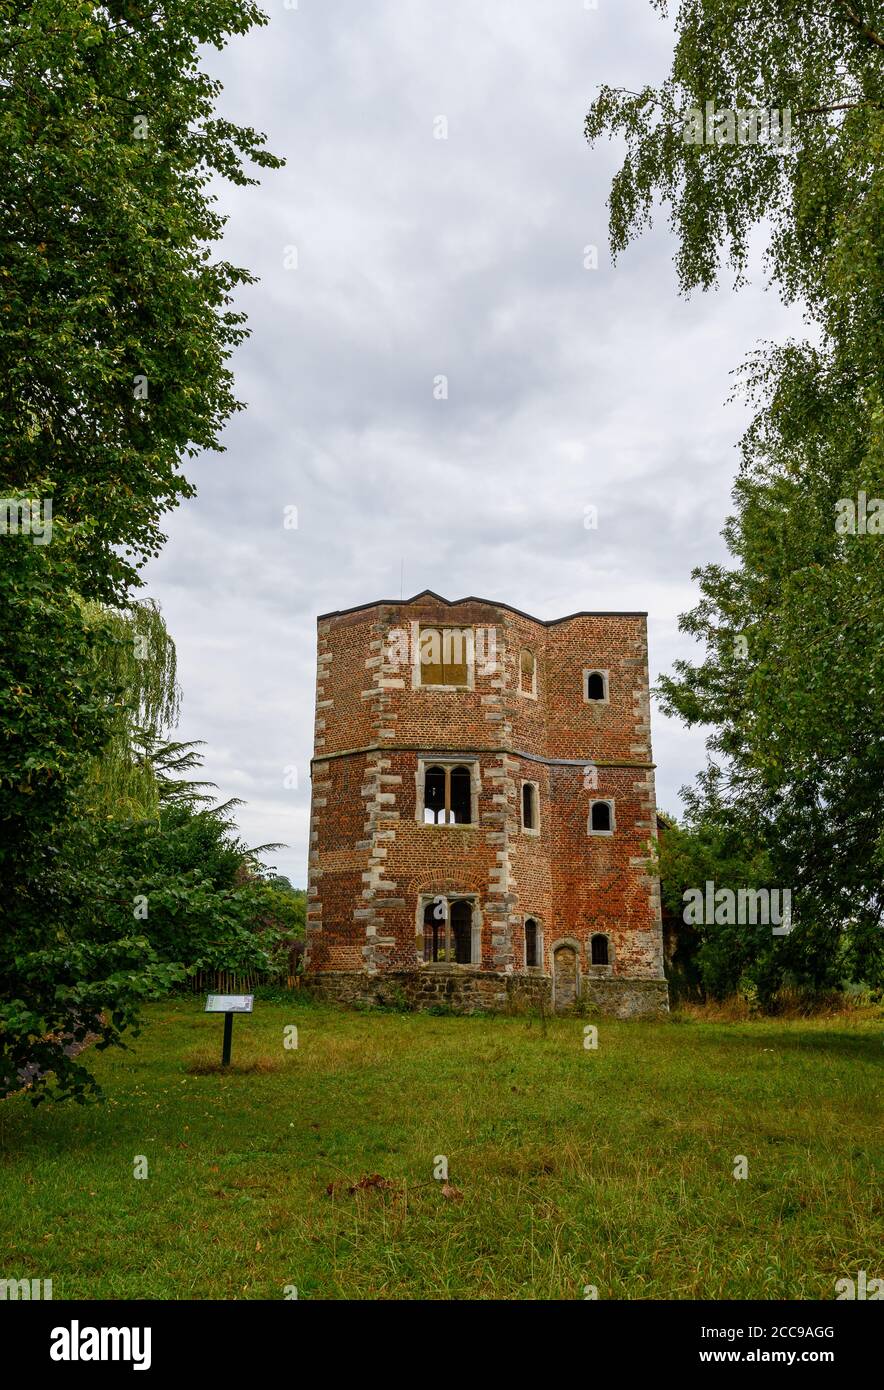 Otford Palace (or the Archbishop's Palace) in Otford, Kent, UK. This is the North-West Tower, the principle surviving remains of the palace. Stock Photo